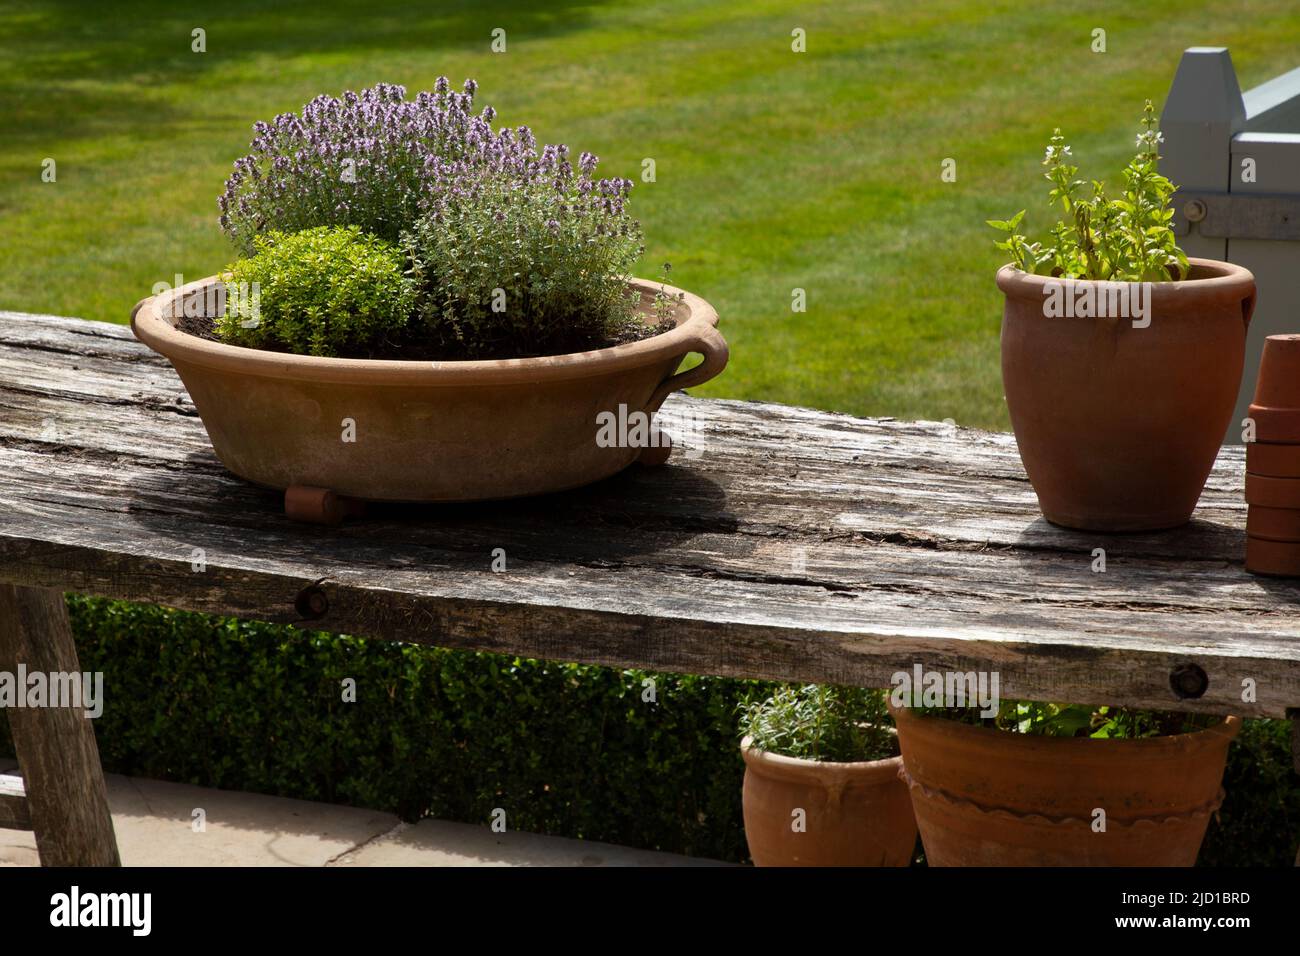 Terracotta bowl full of herbs on wooden table in English garden,England Stock Photo